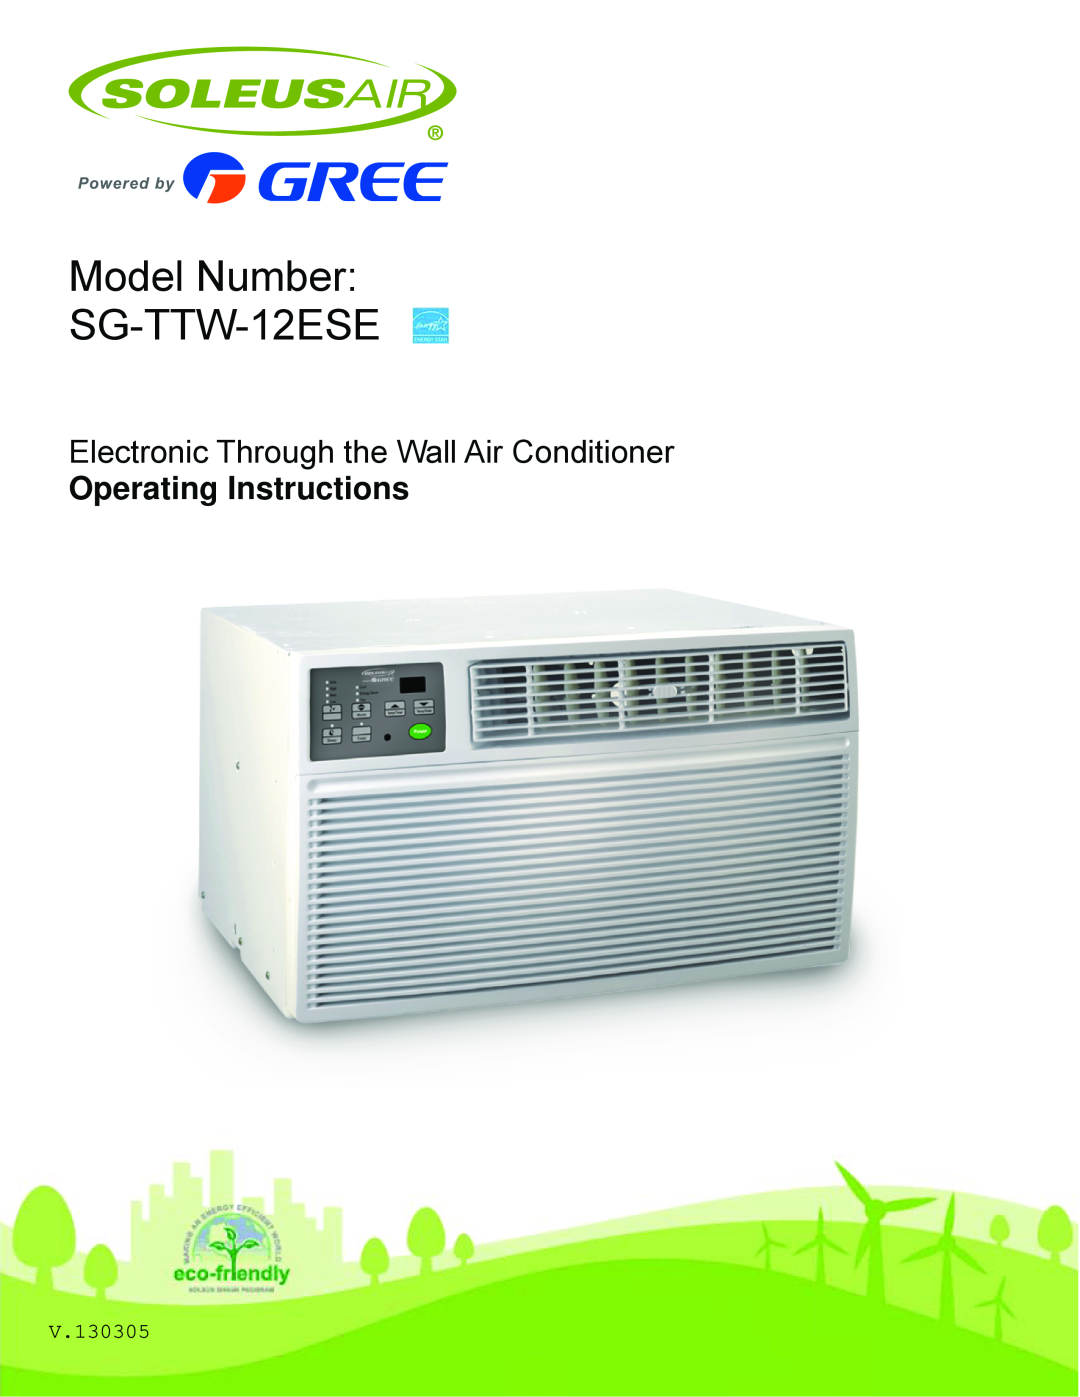 Soleus Air operating instructions Model Number SG-TTW-12ESE, Electronic Through the Wall Air Conditioner, V.130305 